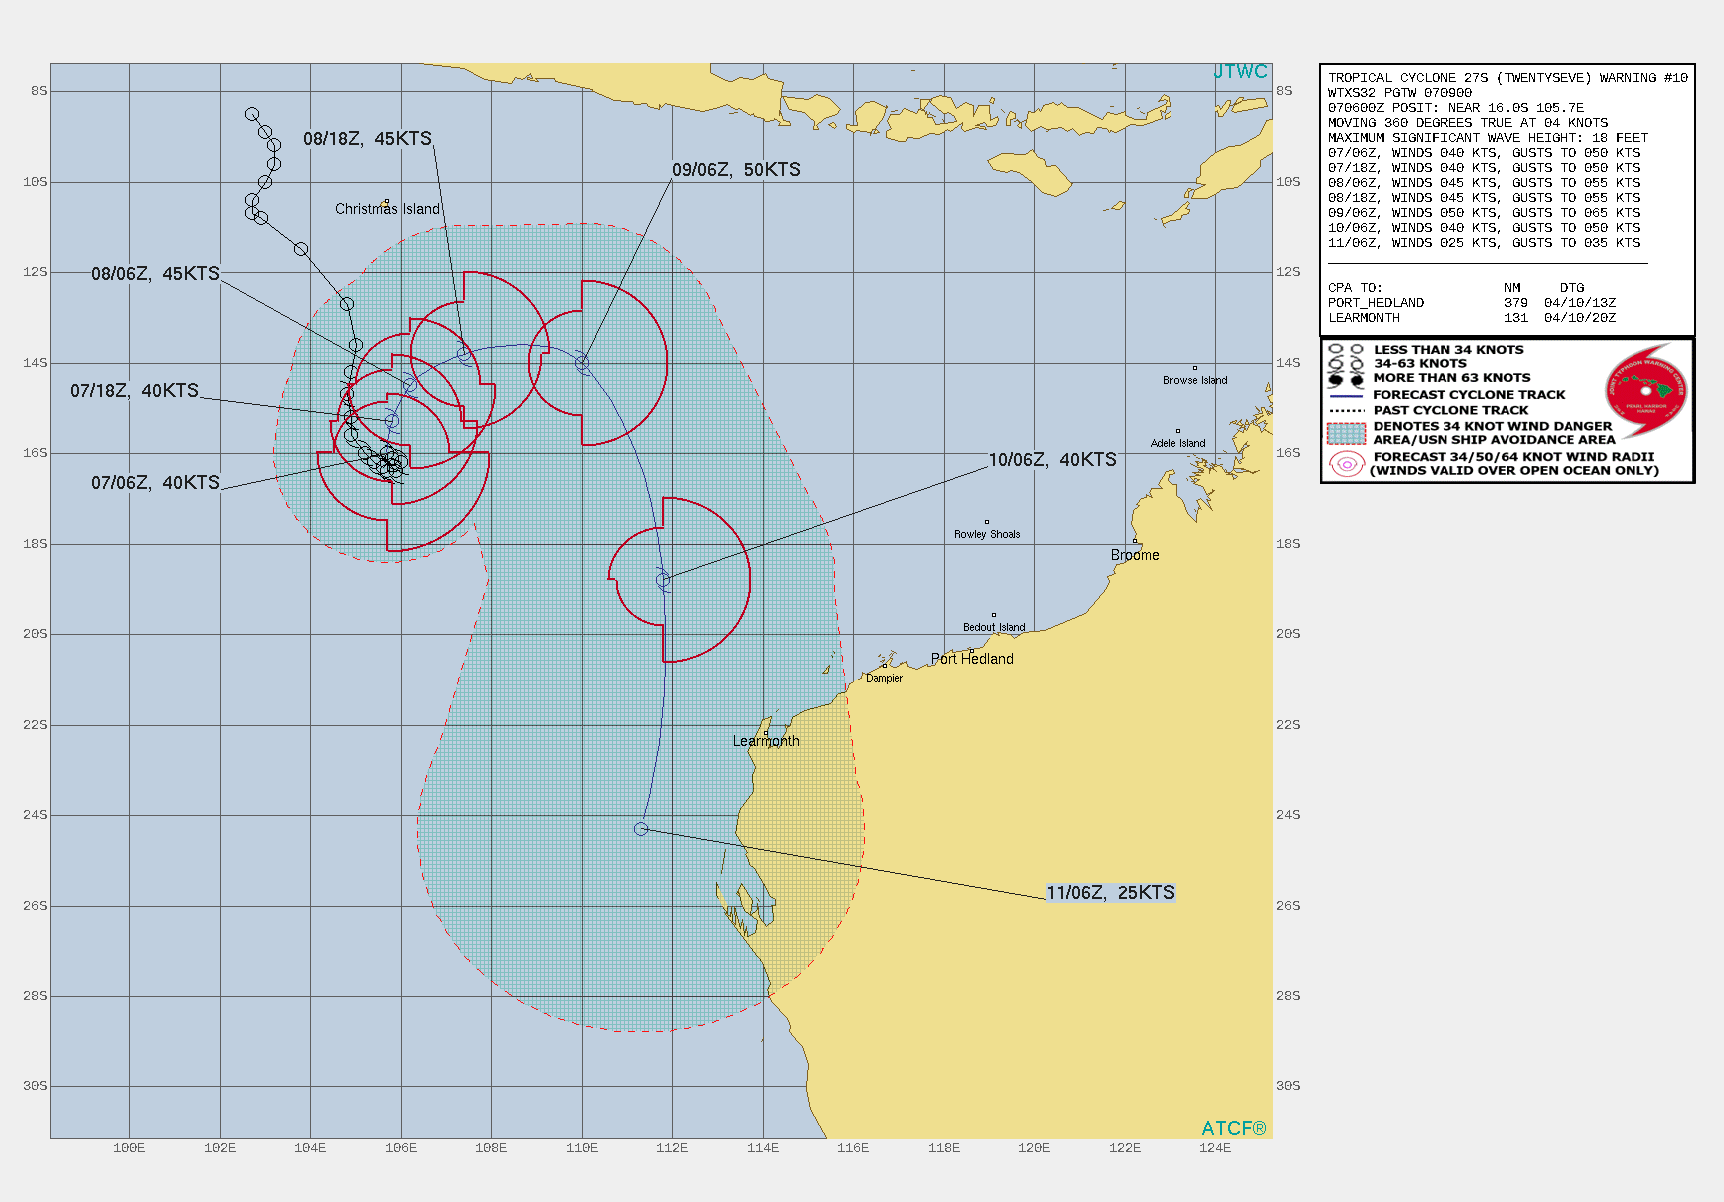 26S. WARNING 10 ISSUED AT 07/09UTC. TC 27S IS ENSCONCED IN A MARGINAL ENVIRONMENT WITH A MODERATE (15-20 KTS) EASTERLY VERTICAL WIND SHEAR(VWS) INDUCED FROM  THE GENERAL EAST-NORTHEASTERLY ENVIRONMENTAL FLOW ALOFT AS WELL AS  OUTFLOW FROM TC 26S TO THE NORTHEAST. WHILE SHEAR IS MODERATE, IT IS  BEING OFFSET SOMEWHAT BY ROBUST POLEWARD OUTFLOW AND WARM SSTS. TC  27S IS FORECAST TO CONTINUE TRACKING SLOWLY NORTHWARD OVER THE NEXT  24 HOURS UNDER GENERALLY WEAK STEERING CONDITIONS, BUT WILL TURN  EAST BY 36H AS IT MOVES WITHIN 650KM OF TC 26S AND IS CAPTURED BY  THE LARGER SYSTEM. ONCE CAPTURED, TC 27S WILL BEGIN BINARY  INTERACTION WITH TC 26S, RAPIDLY ACCELERATING AROUND TO A  SOUTHEASTWARD AND THEN SOUTHWARD TRACK BETWEEN 48H THROUGH 96H. THE TWO SYSTEMS WILL MOVE TO WITHIN 315KM OF ONE ANOTHER BY 72H AND TC 27S WILL BEGIN TO BECOME ABSORBED BY TC 26S, WITH FULL  MERGER EXPECTED NO LATER THAN 96H. CURRENT ENVIRONMENTAL  CONDITIONS ARE EXPECTED TO PERSIST OVER THE NEXT 24 HOURS, WITH  LITTLE TO NO CHANGE IN INTENSITY EXPECTED BEFORE 24H. AS THE  SYSTEM BEGINS TO MOVE NORTH OF TC 26S IT WILL MOVE INTO AN AREA OF  IMPROVED OUTFLOW AND DECREASED VWS, ALLOWING FOR A BRIEF PERIOD OF  INTENSIFICATION, TO A PEAK OF 50 KNOTS AT 48H. AFTER THIS POINT,  THE COMBINATION OF INCREASING VWS AND DISRUPTION OF THE VORTEX DUE  TO INTERACTION WITH TC 26S WILL LEAD TO RAPID WEAKENING AFTER 72H.